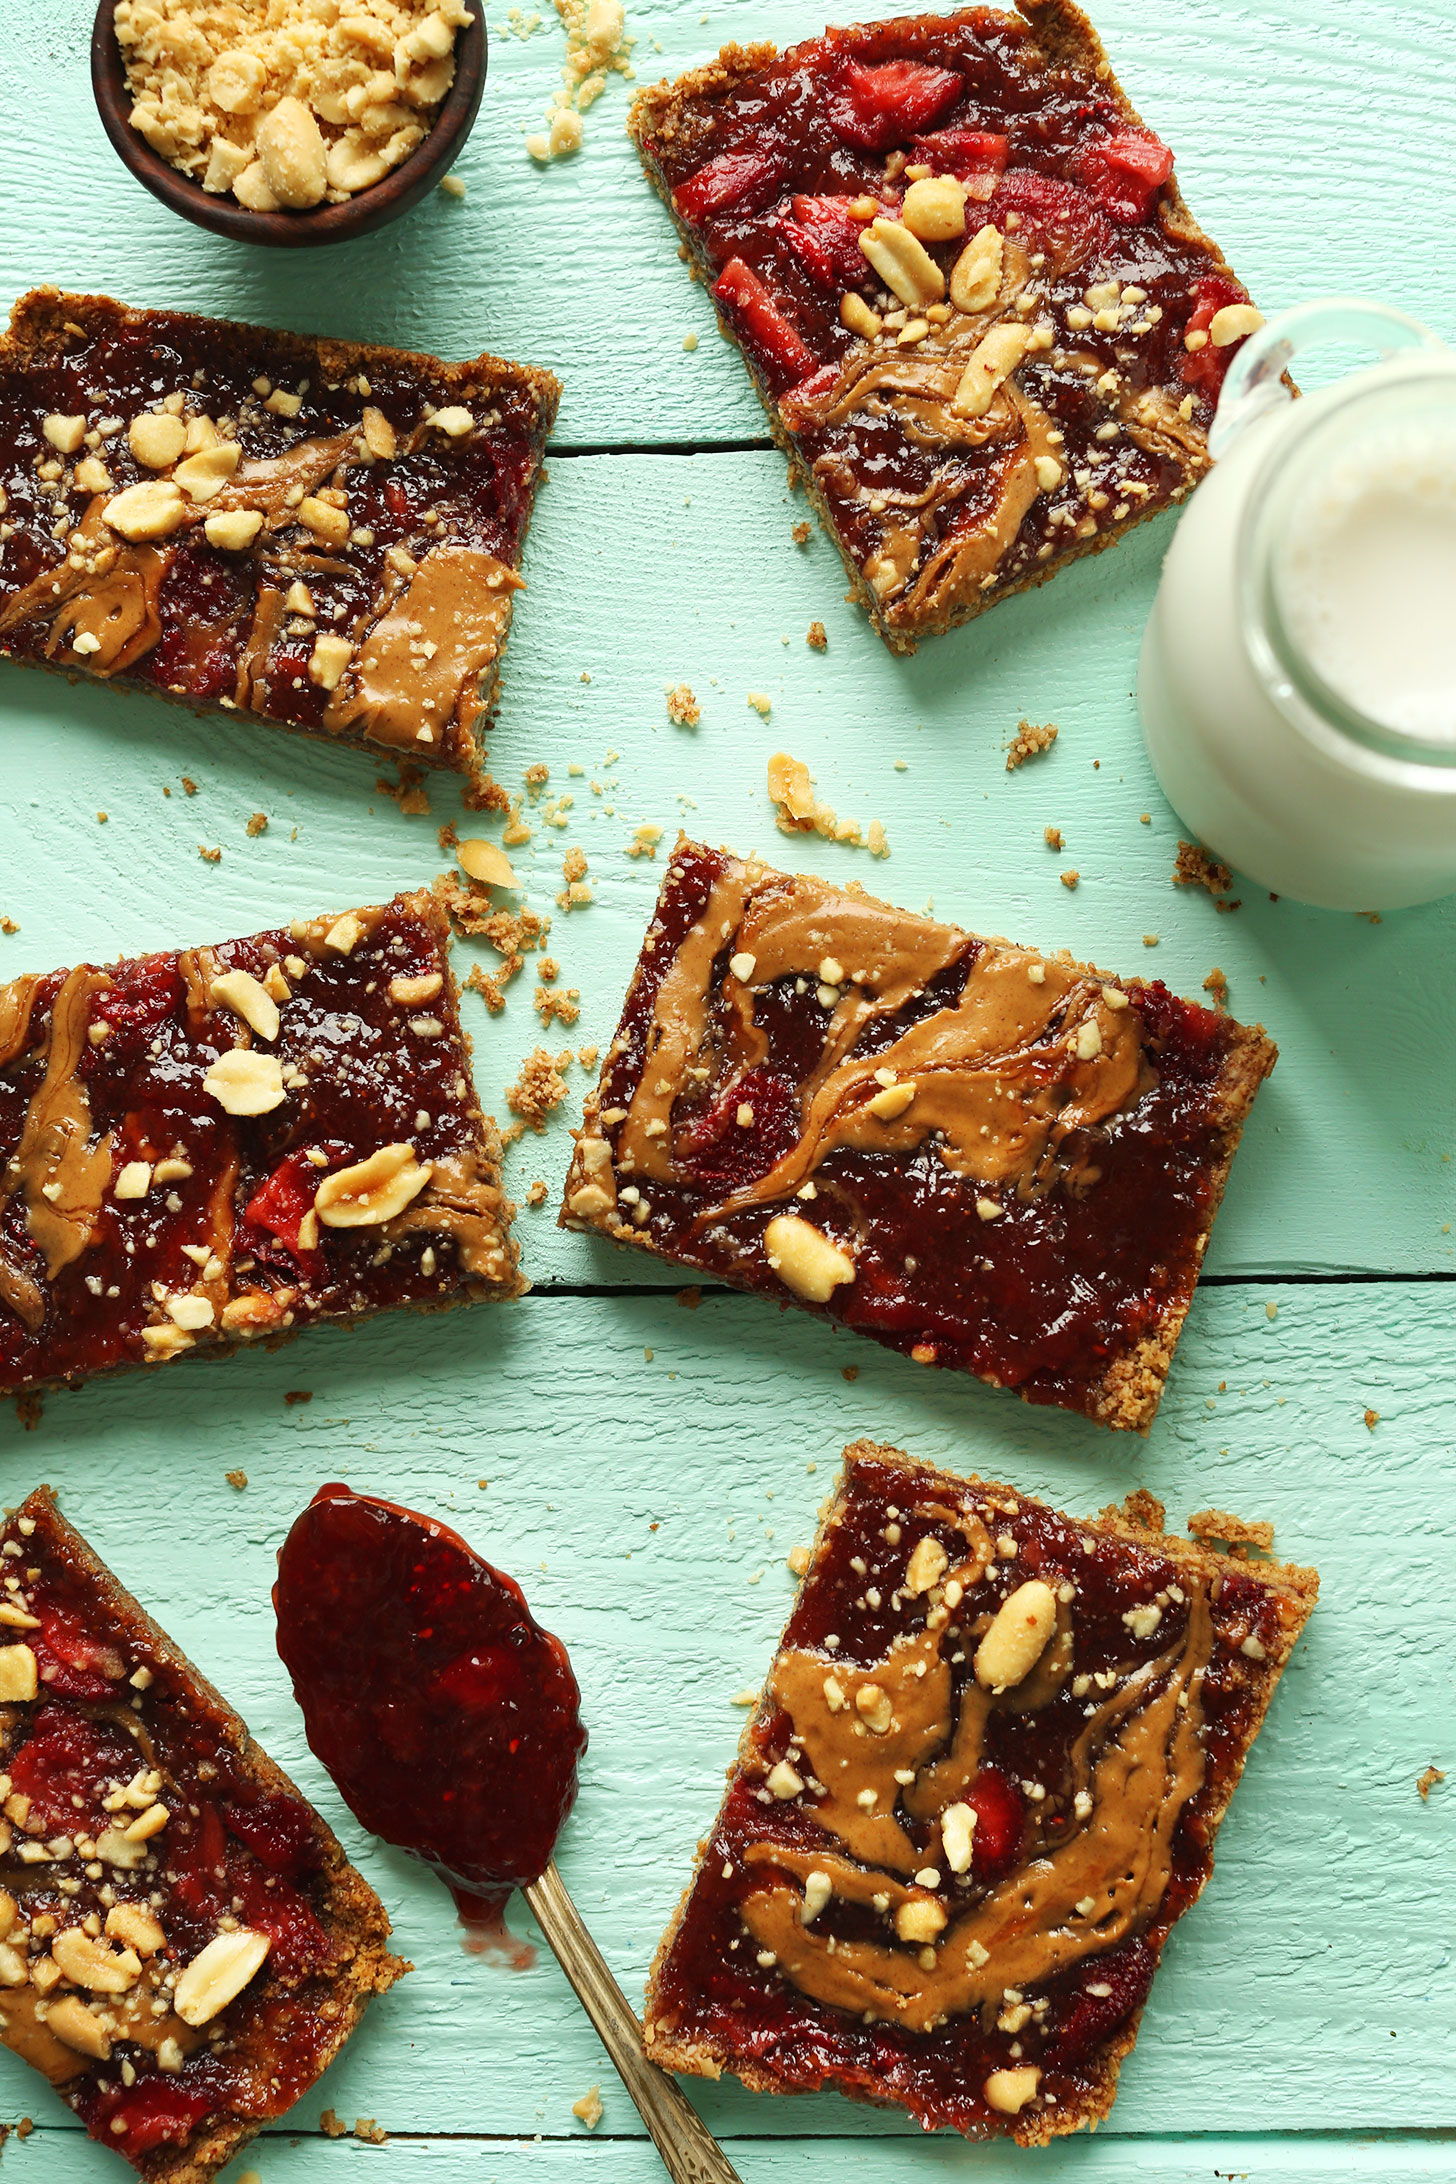 Squares of our simple healthy PB&J Oat Bars recipe